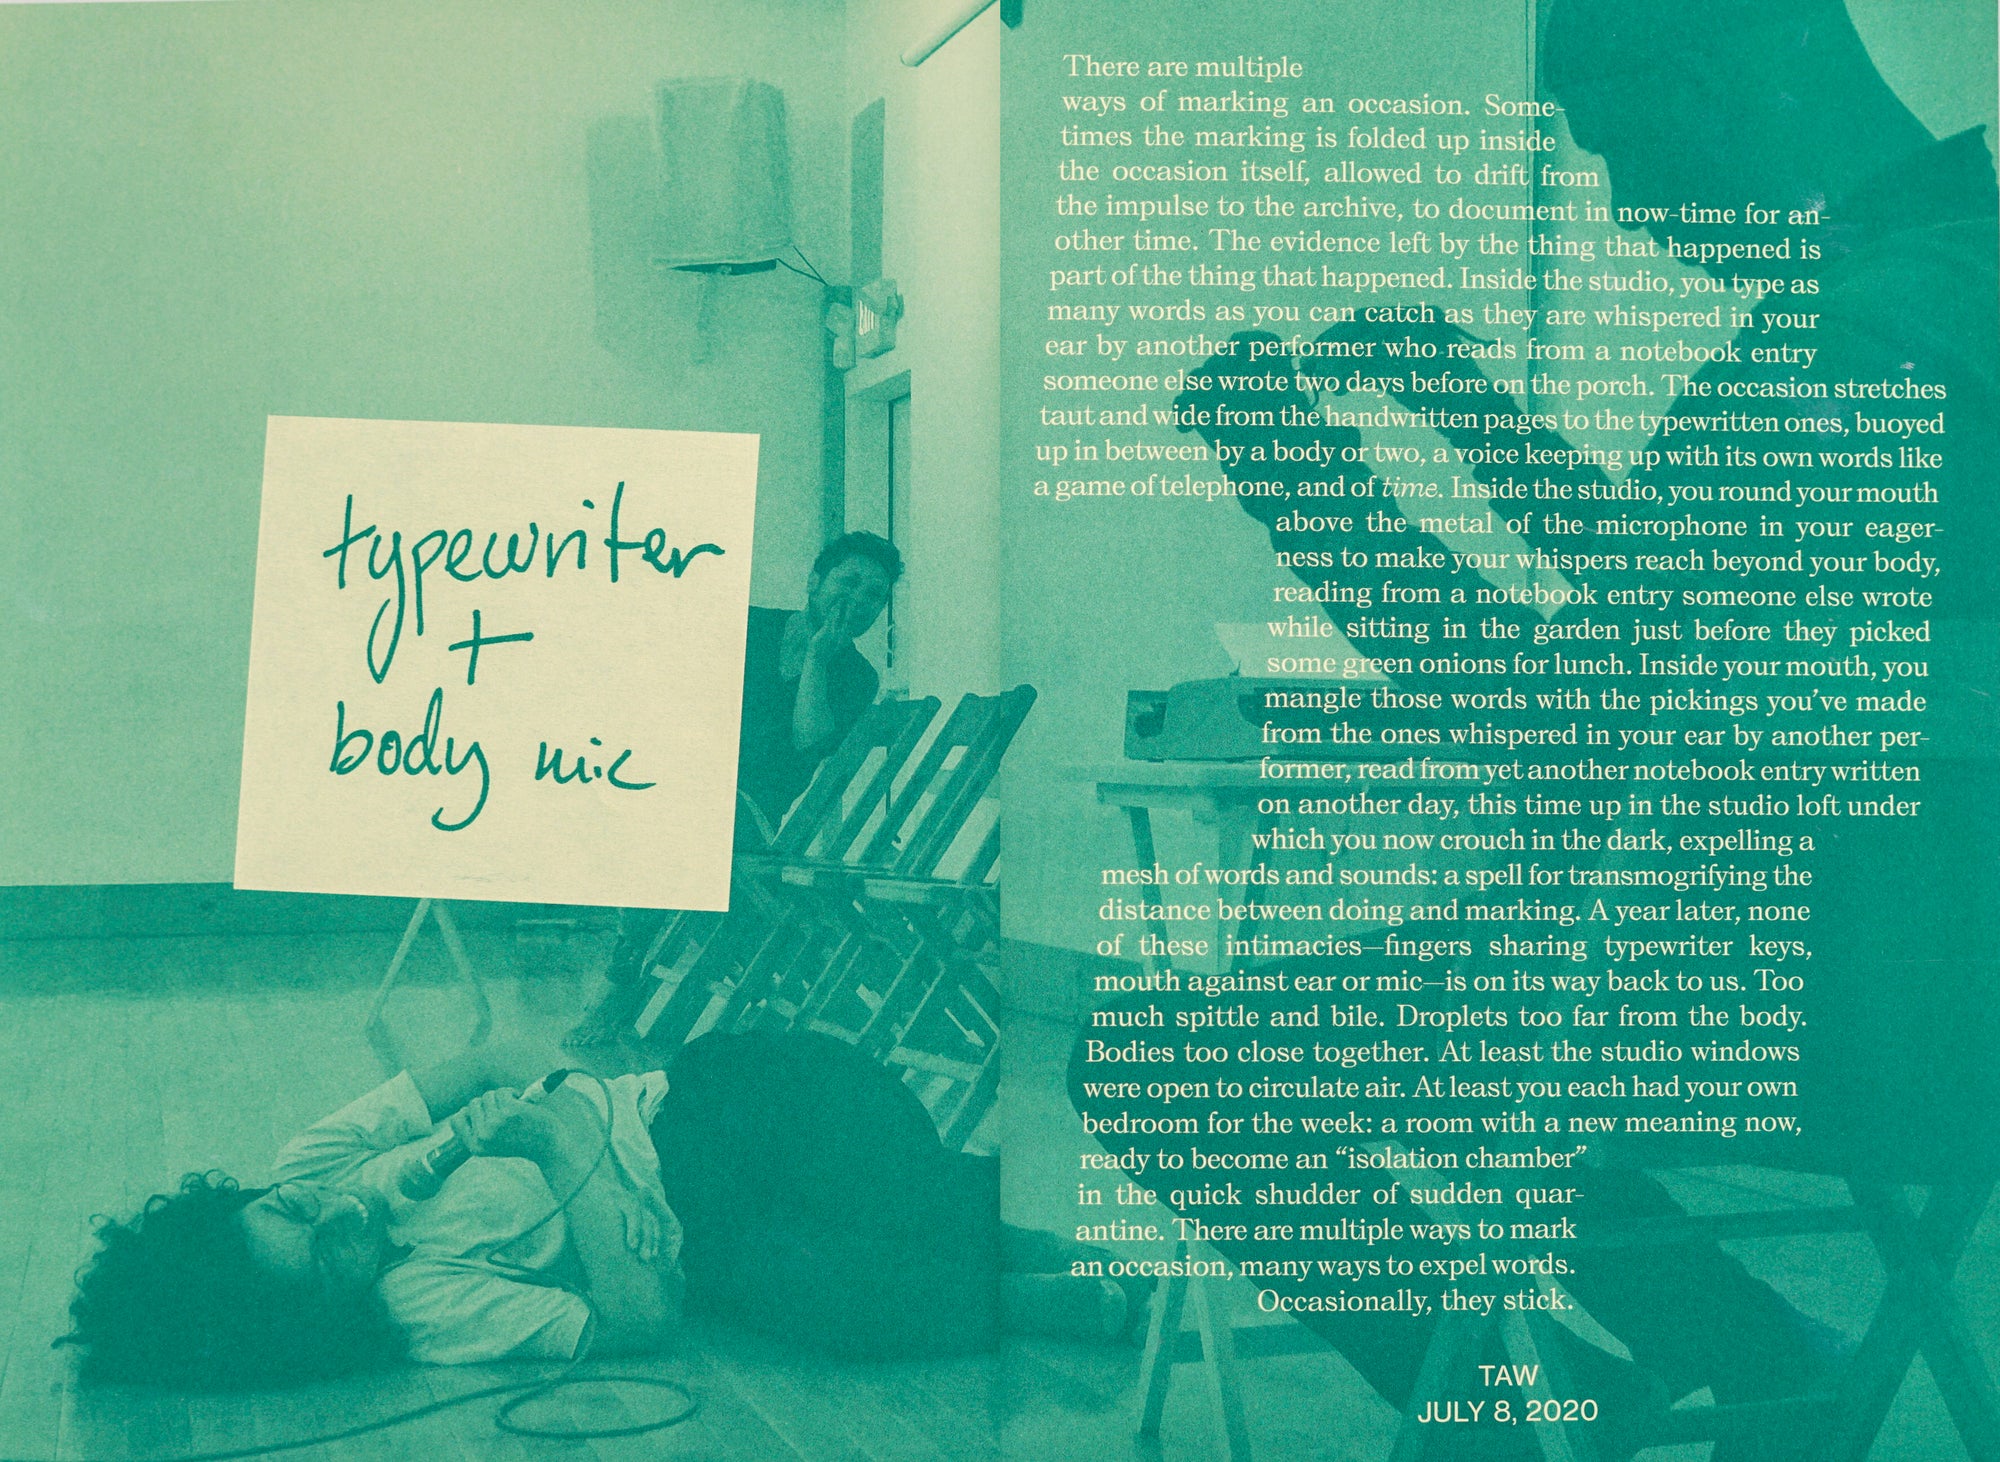 Spread depicting a monotone green photograph of a person on the ground holding a microphone, smiling at the two people who sit on chairs around them. The left side shows a post-it note that reads 'typewriter + body mic' and on the right is flow text arranged in a particular shape. The photograph is covering the whole background while the text and post-it sit on top in light yellow.